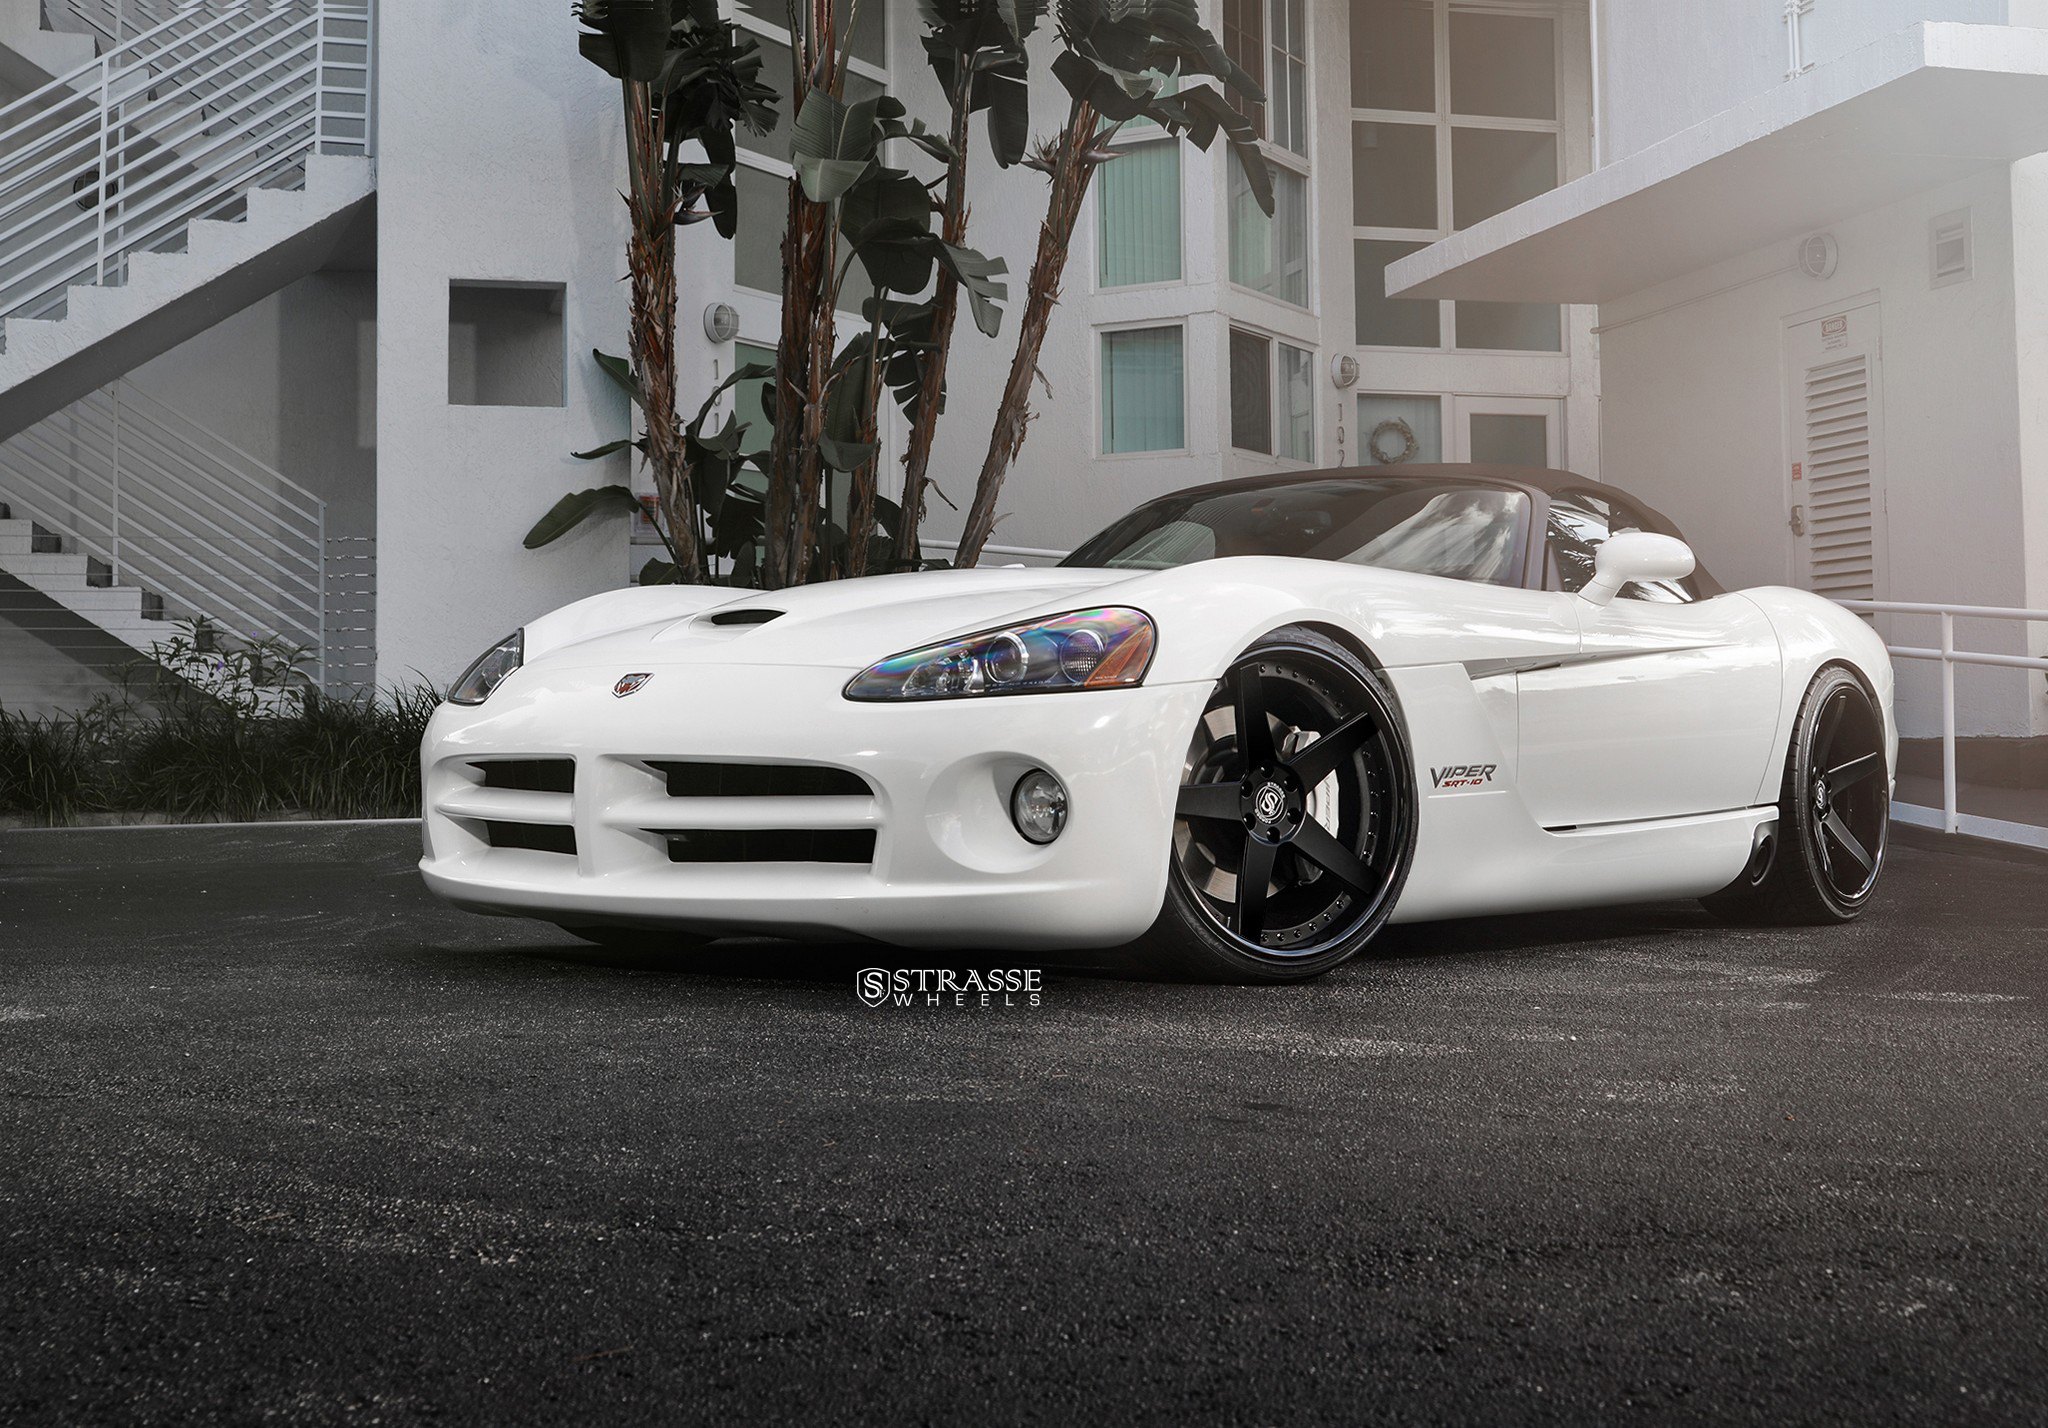 Front Bumper with Fog Lights on White Dodge Viper - Photo by Strasse Forged